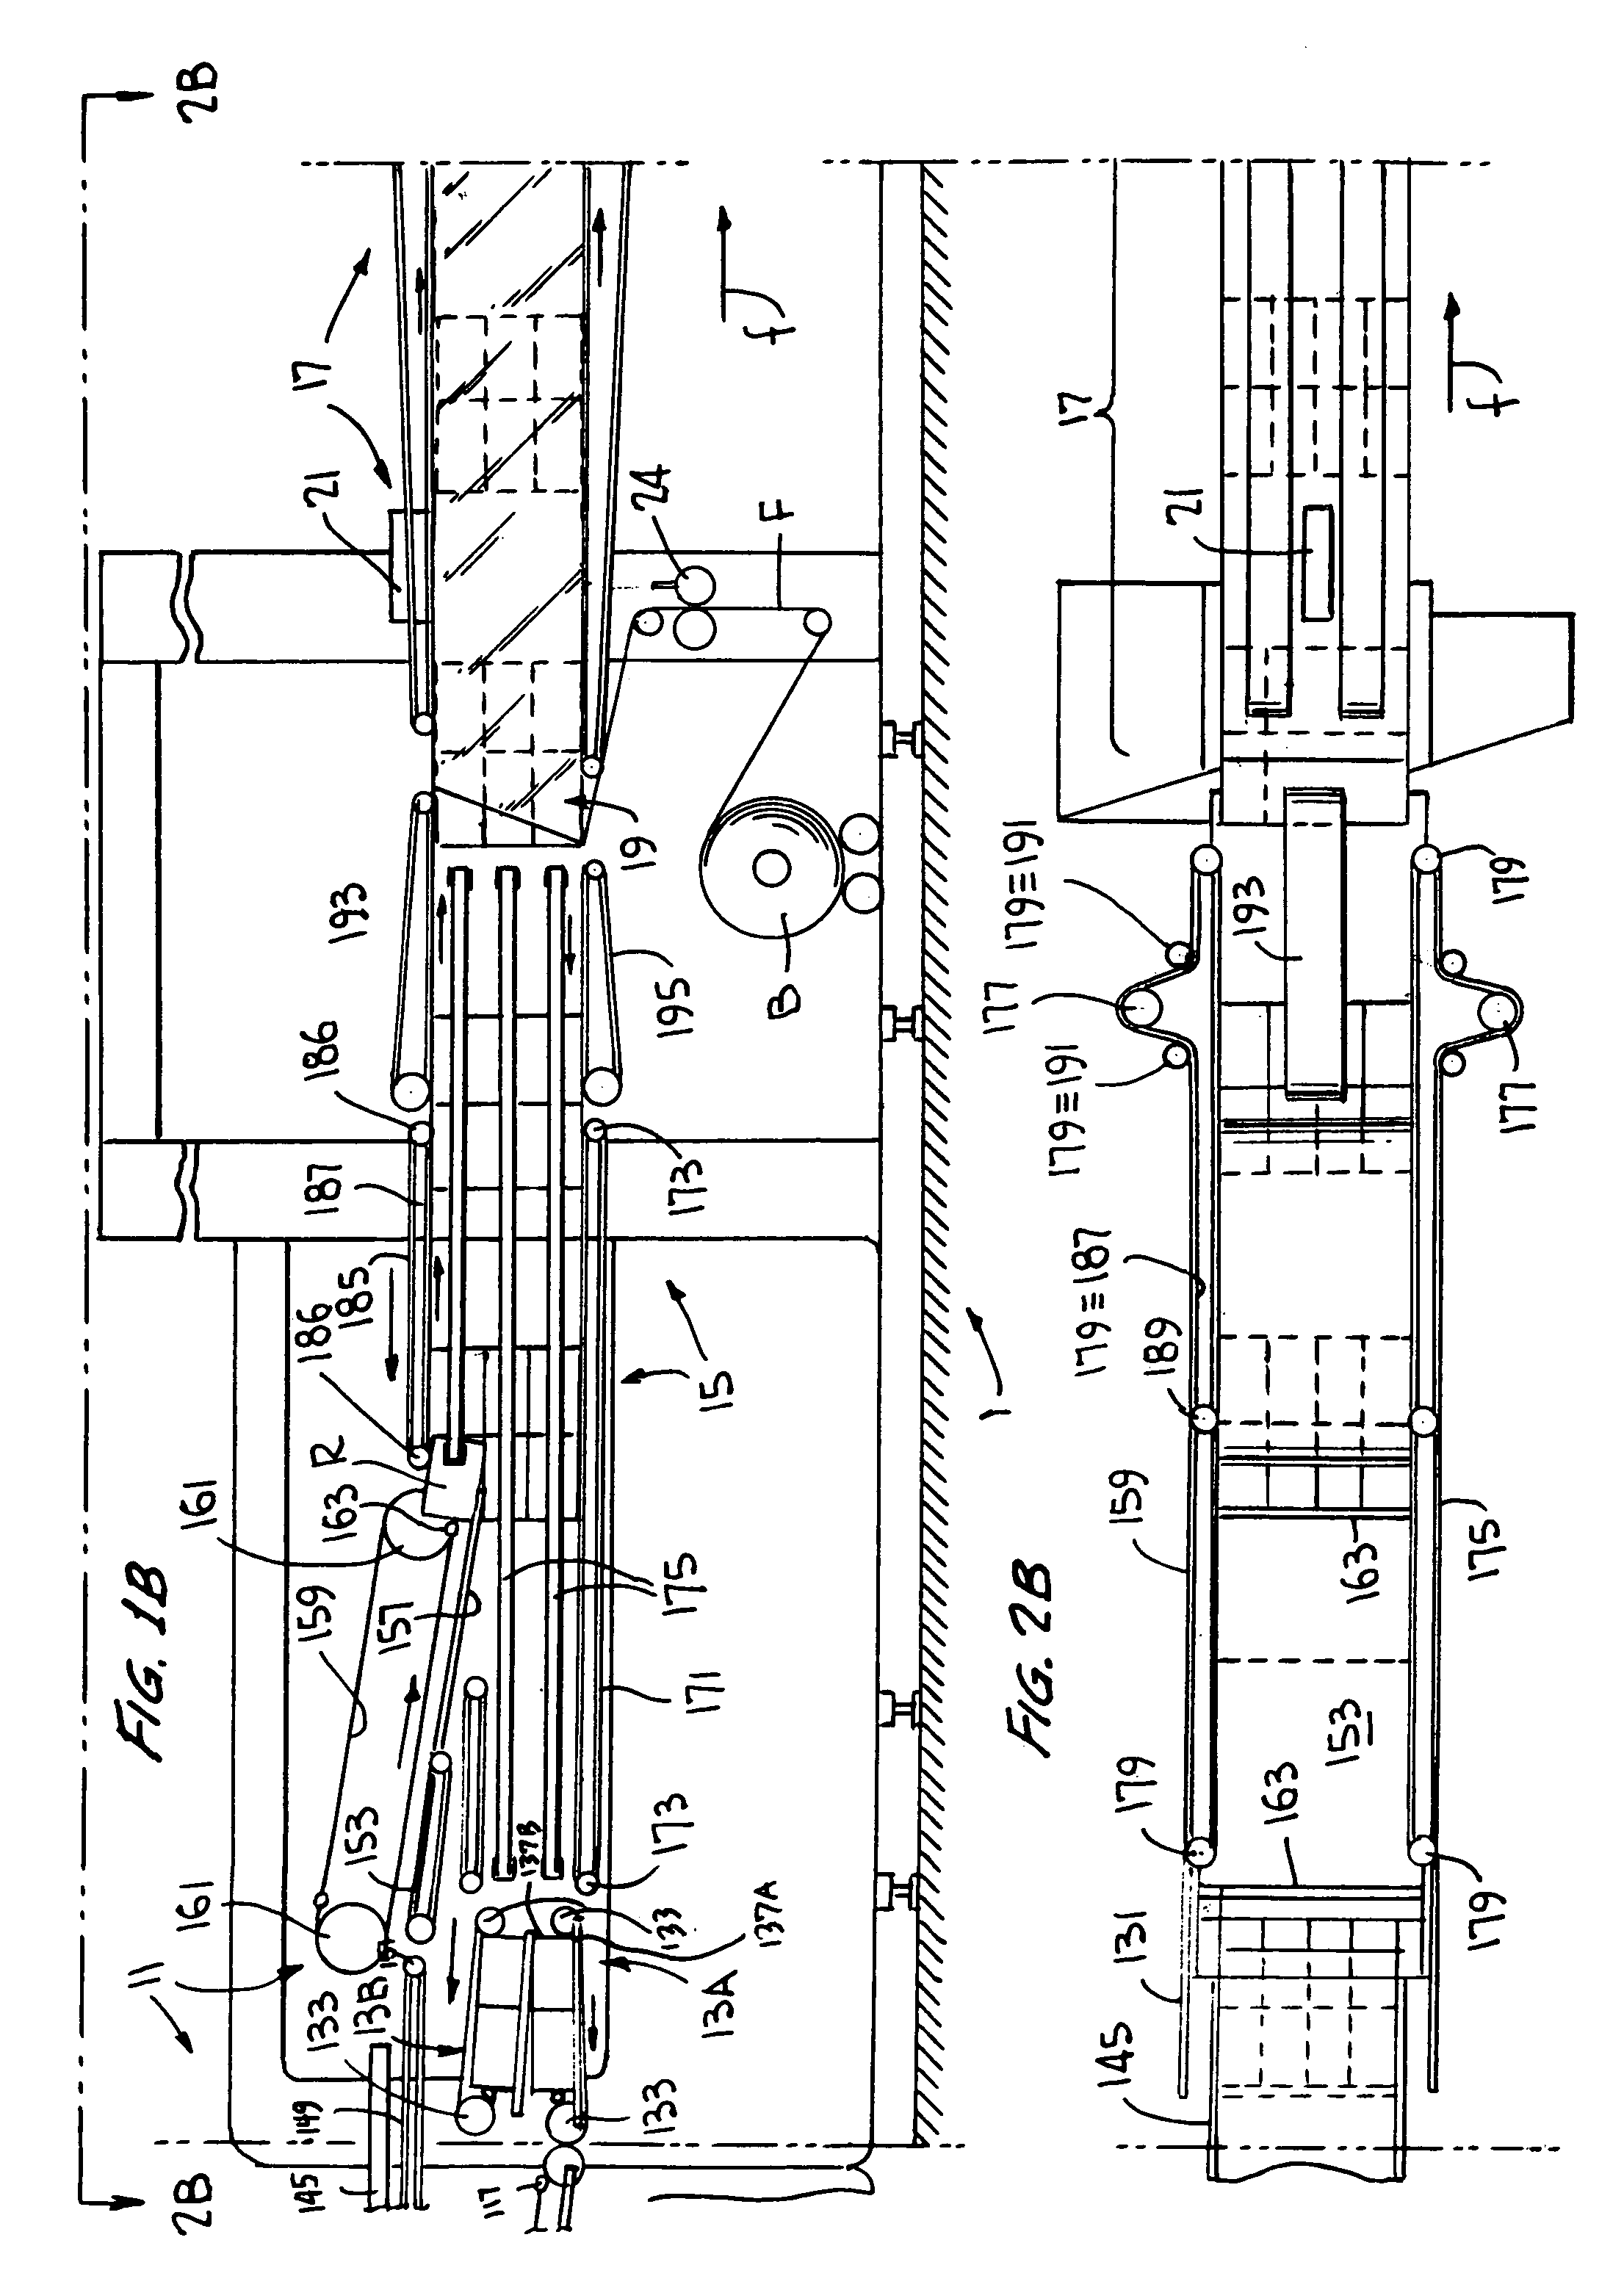 Machine and method for packaging groups of products